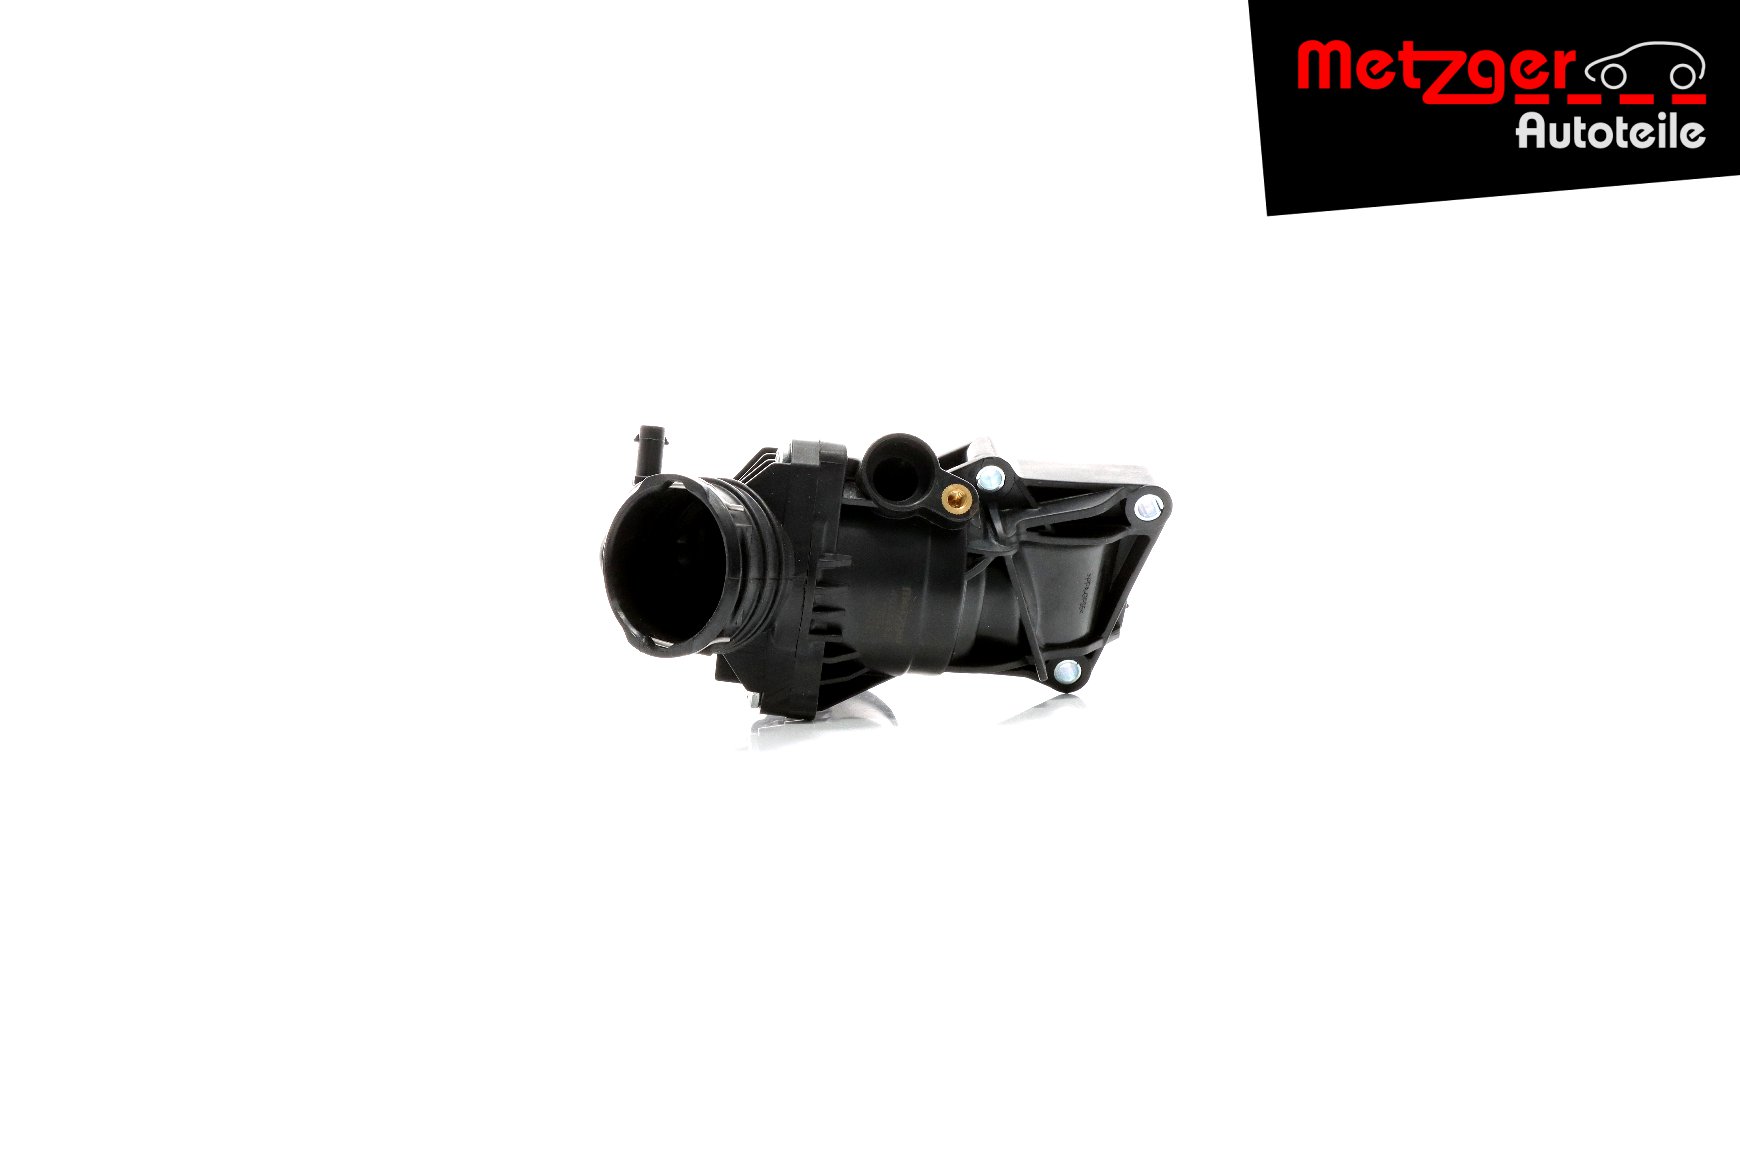 Mercedes C-Class Coolant thermostat 12821899 METZGER 4006262 online buy